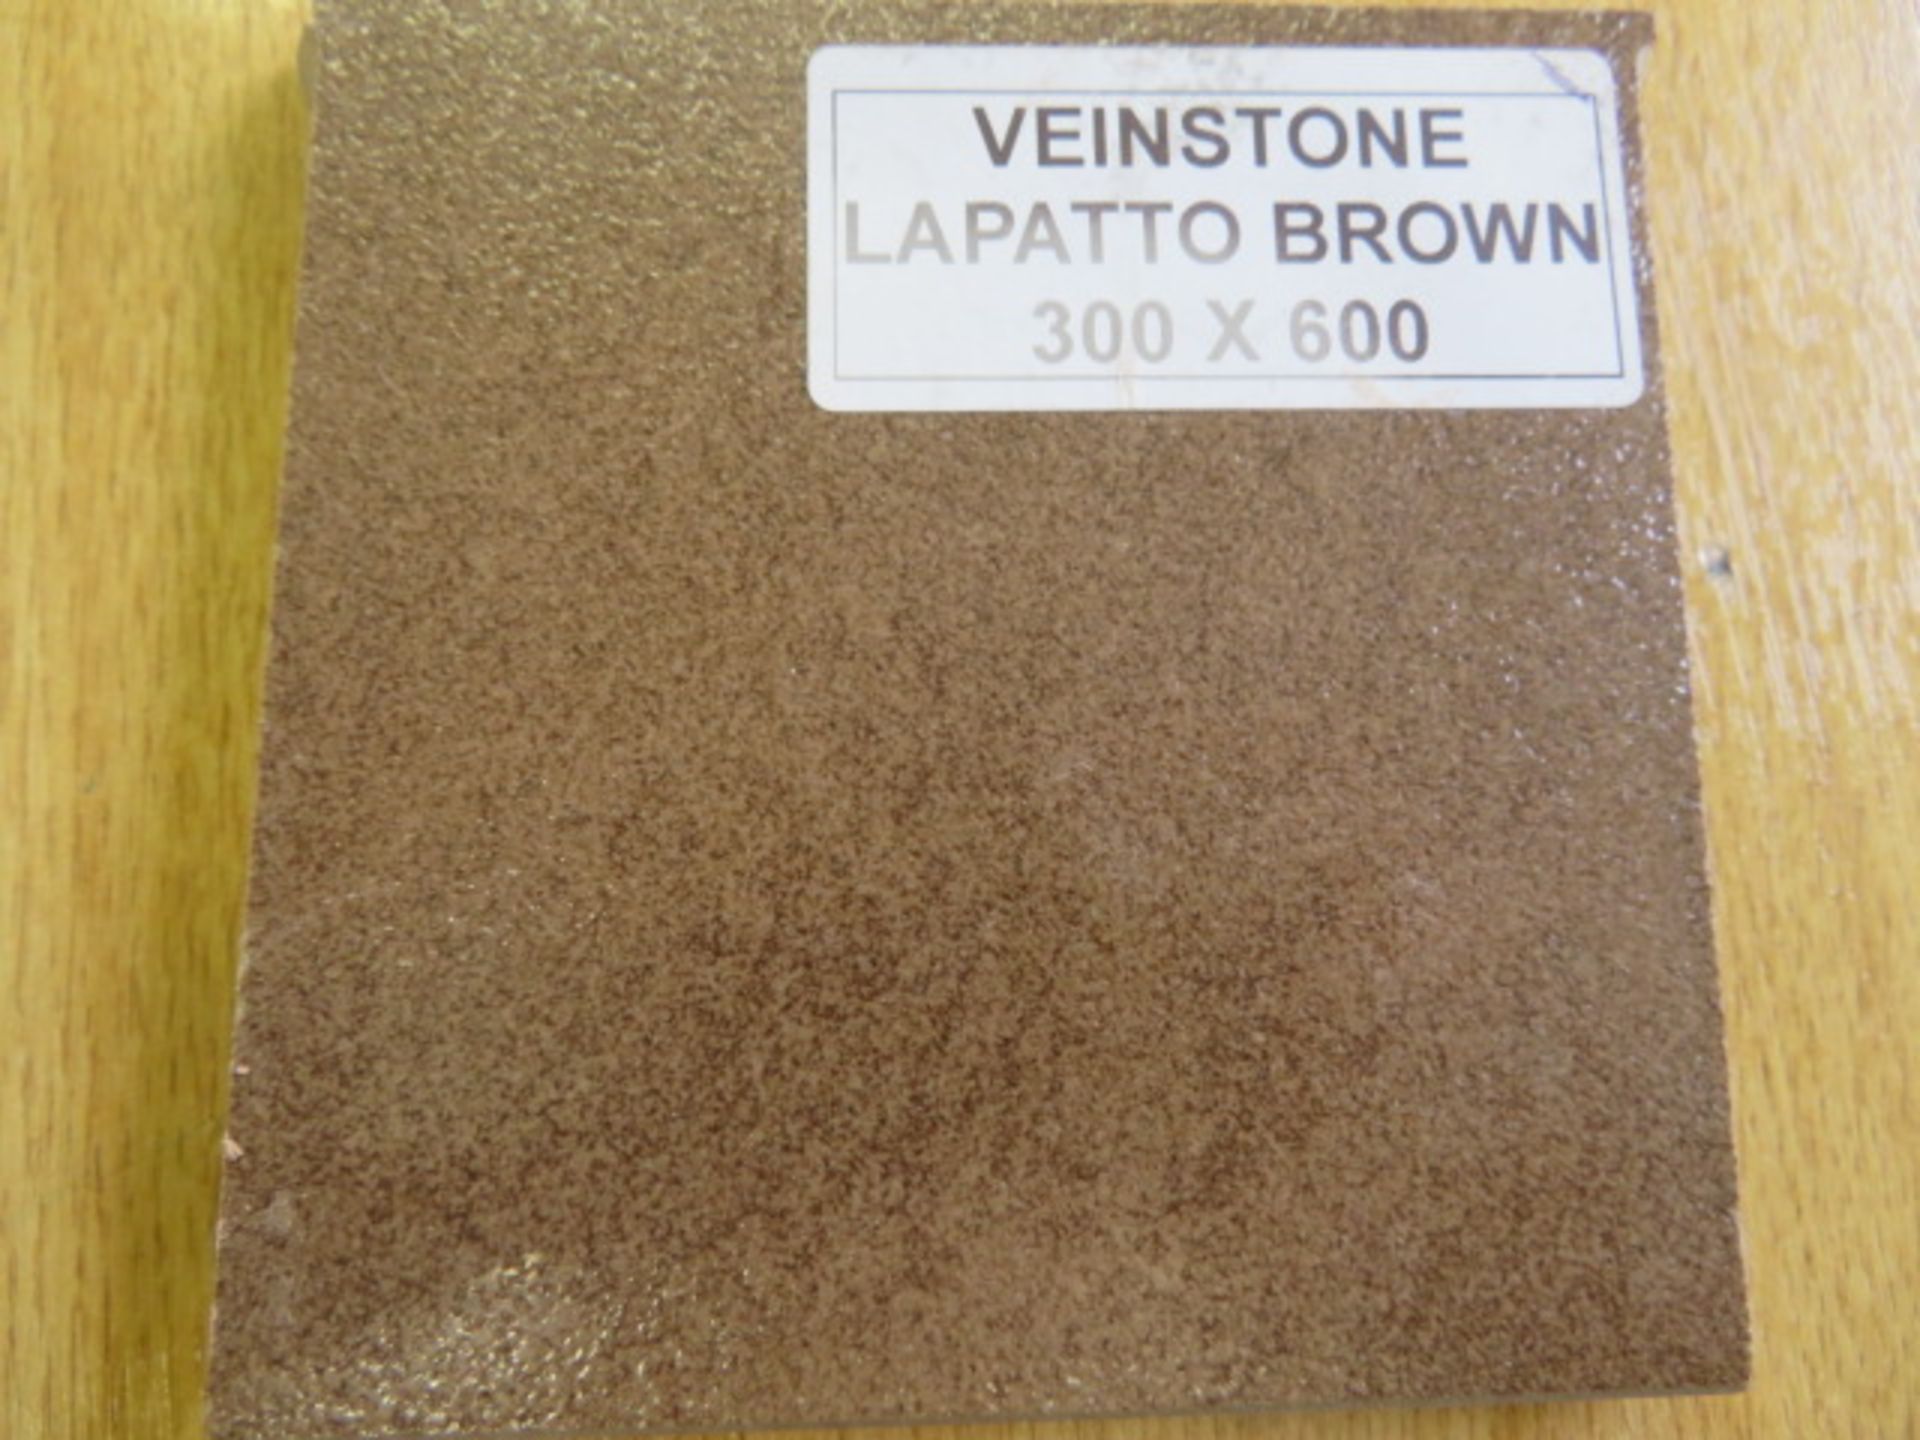 New 8.64 Square Meters Of Veinstone Lapatto Brown Polished Wall And Floor Tiles. 300x600mm, 1.0... - Image 2 of 3